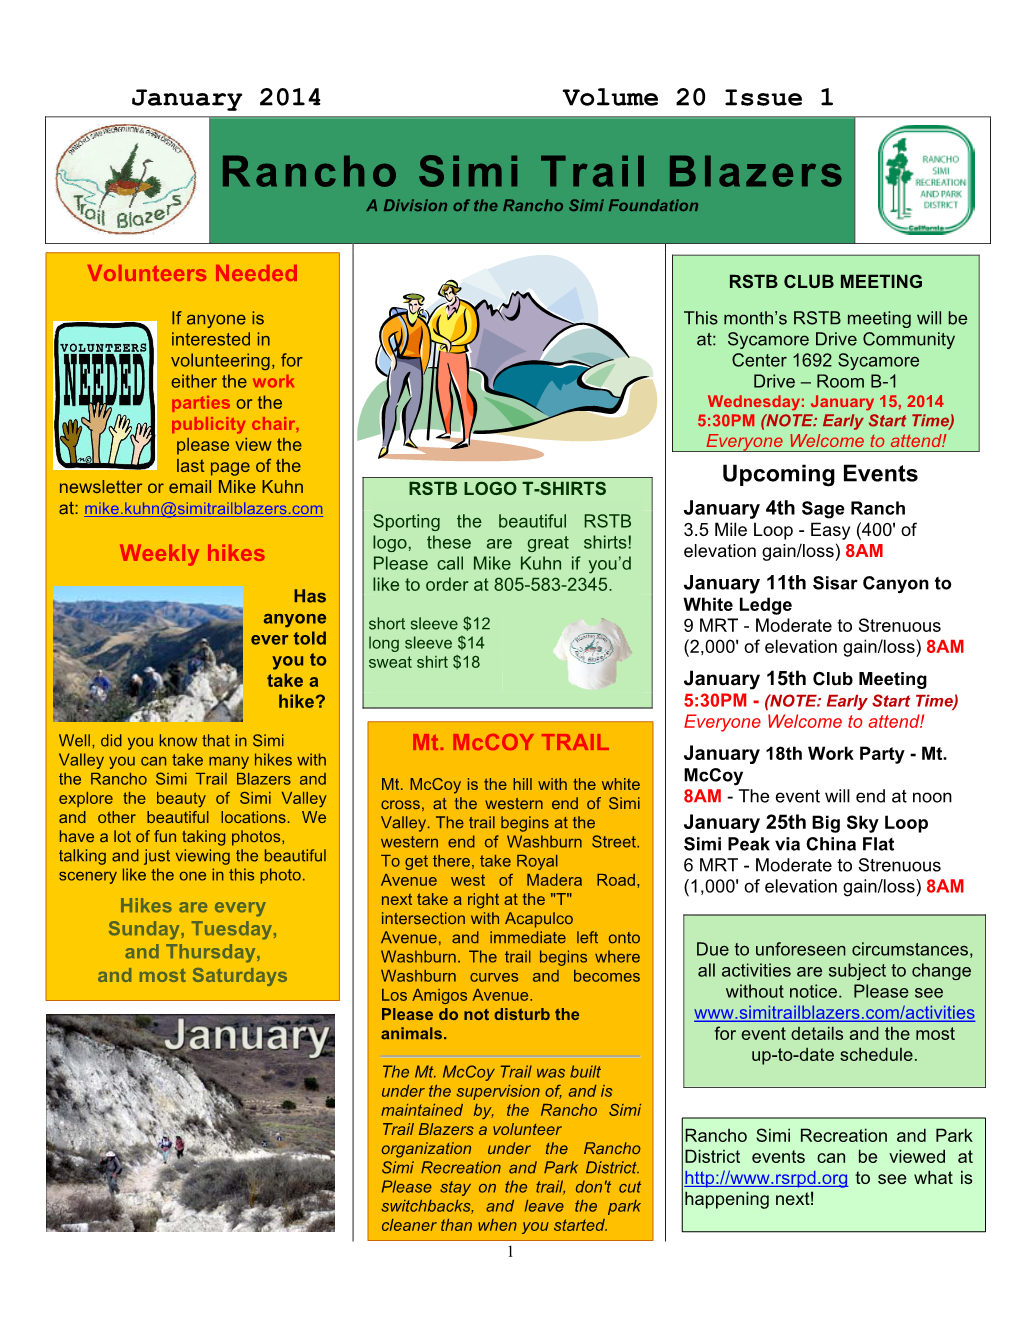 January 2014 Volume 20 Issue 1 Rancho Simi Trail Blazers a Division of the Rancho Simi Foundation